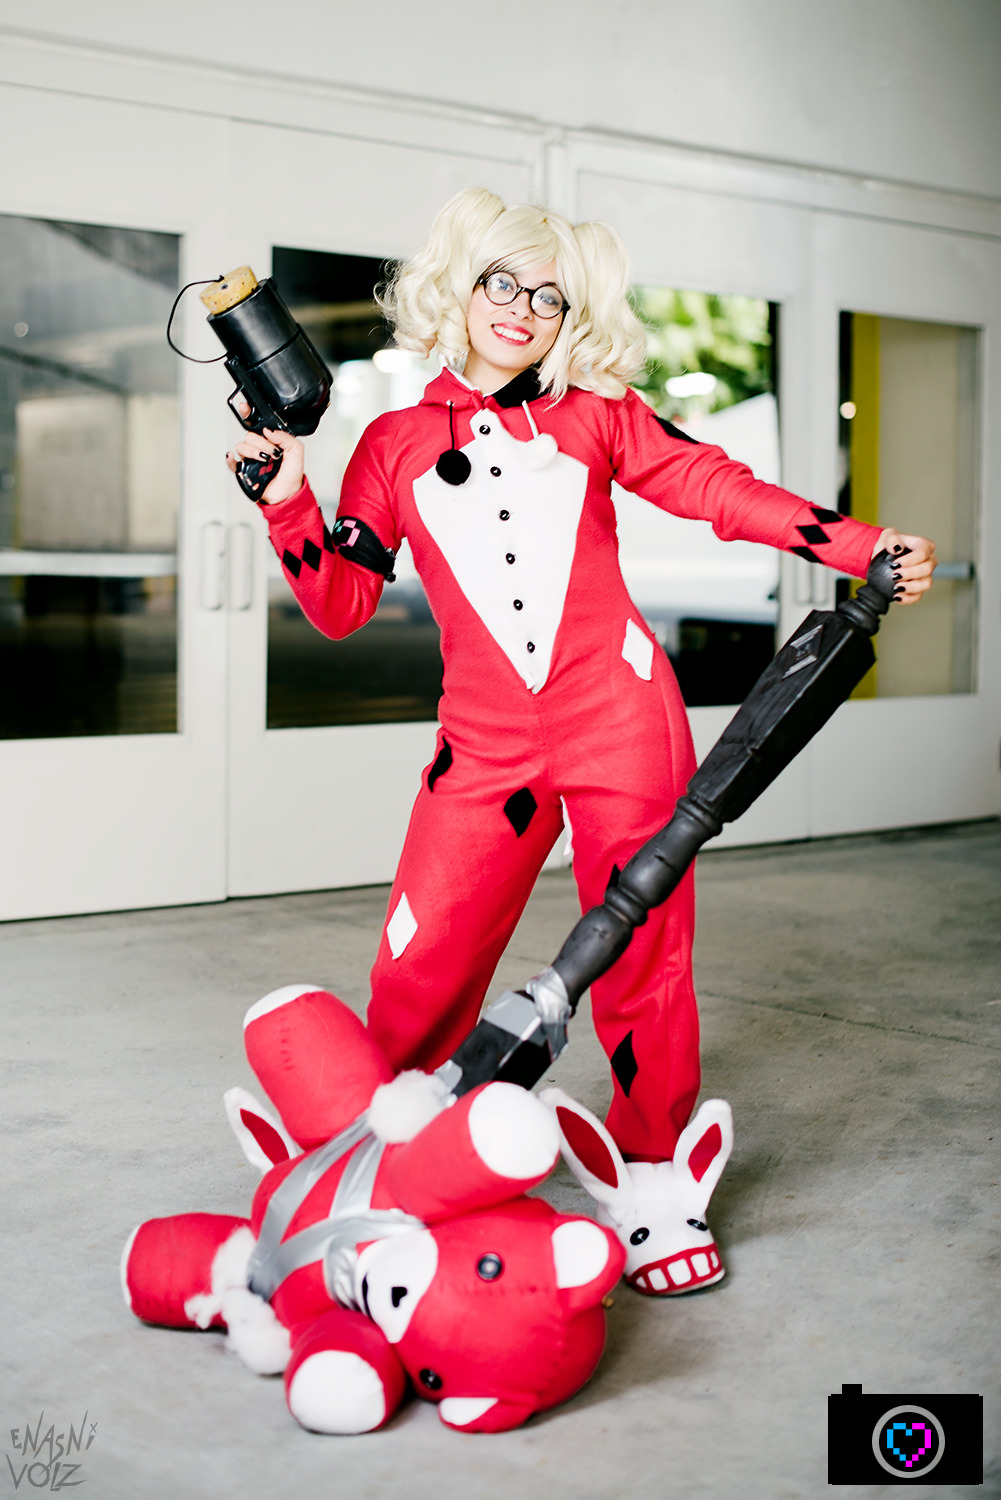 enasnivolzcosplay: Some old shots of my Pajama Party Harley Quinn costume, based